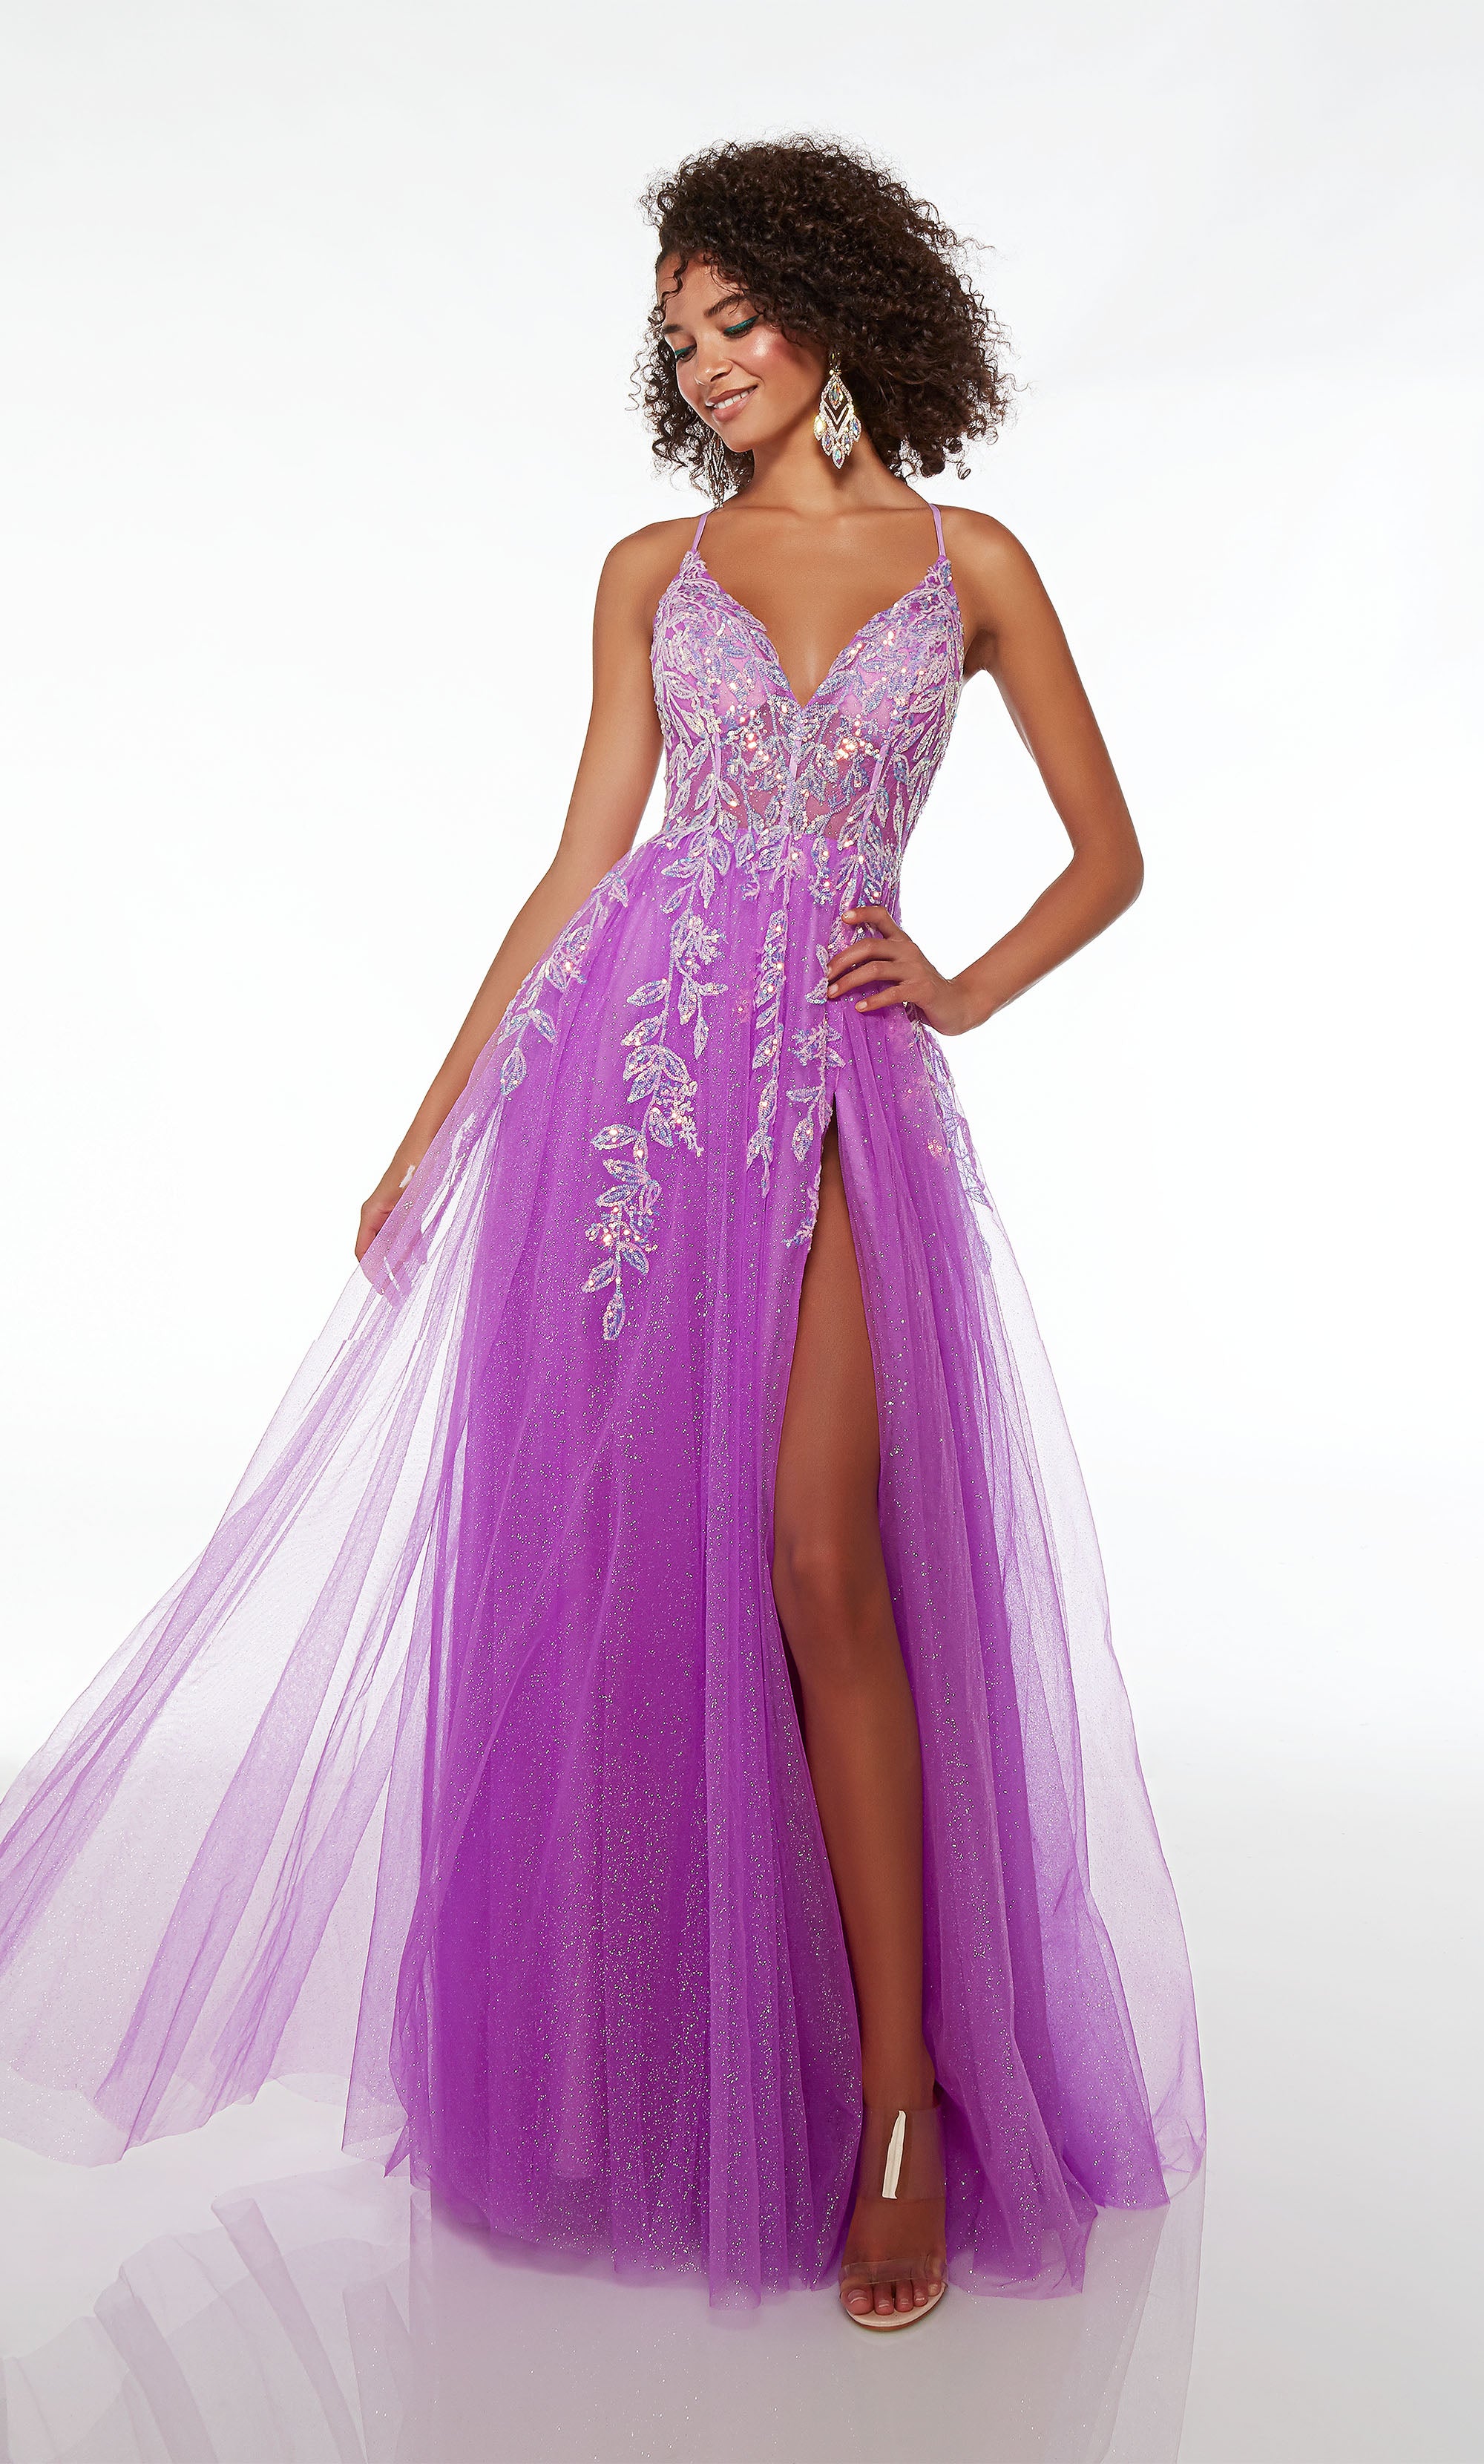 Delicate Prom Dress With Lace Corset / Exclusive Collection 2020 -   Canada